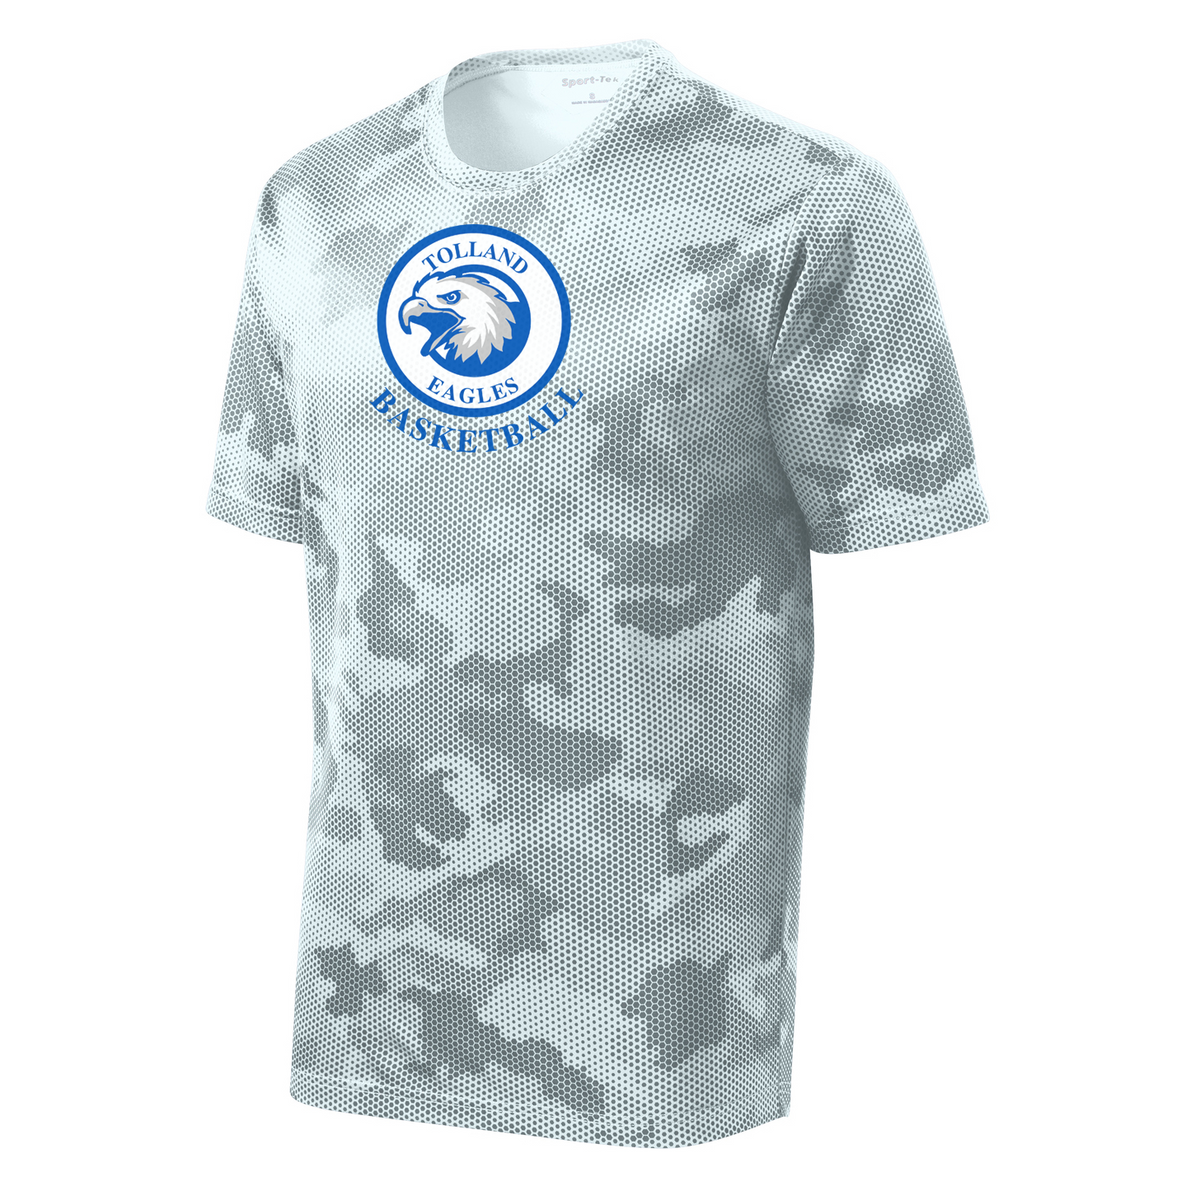 Tolland Travel Basketball CamoHex Tee